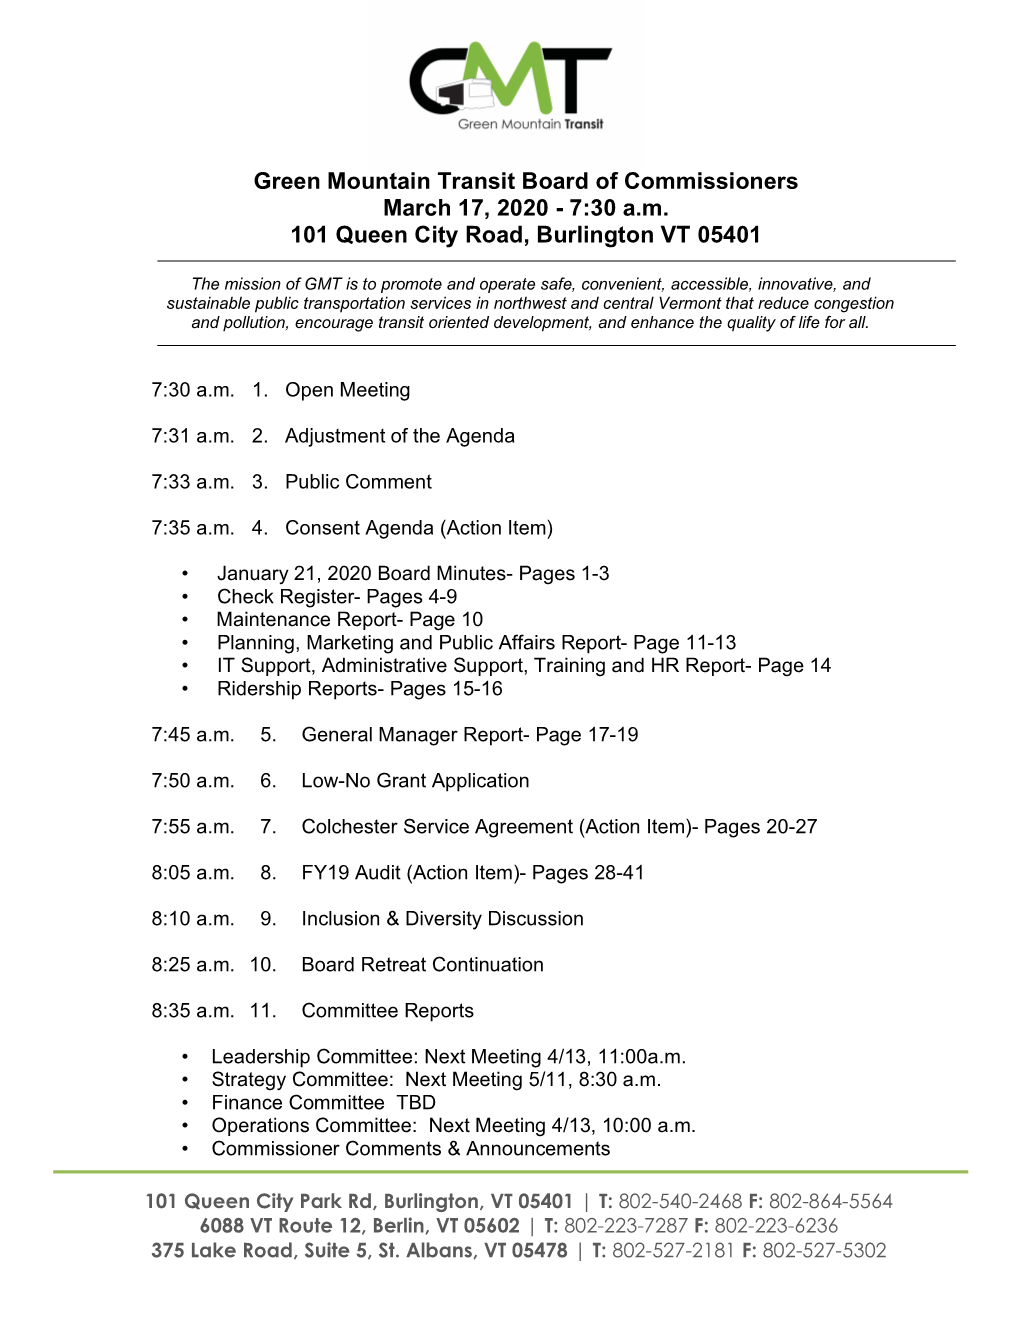 Green Mountain Transit Board of Commissioners March 17, 2020 - 7:30 A.M